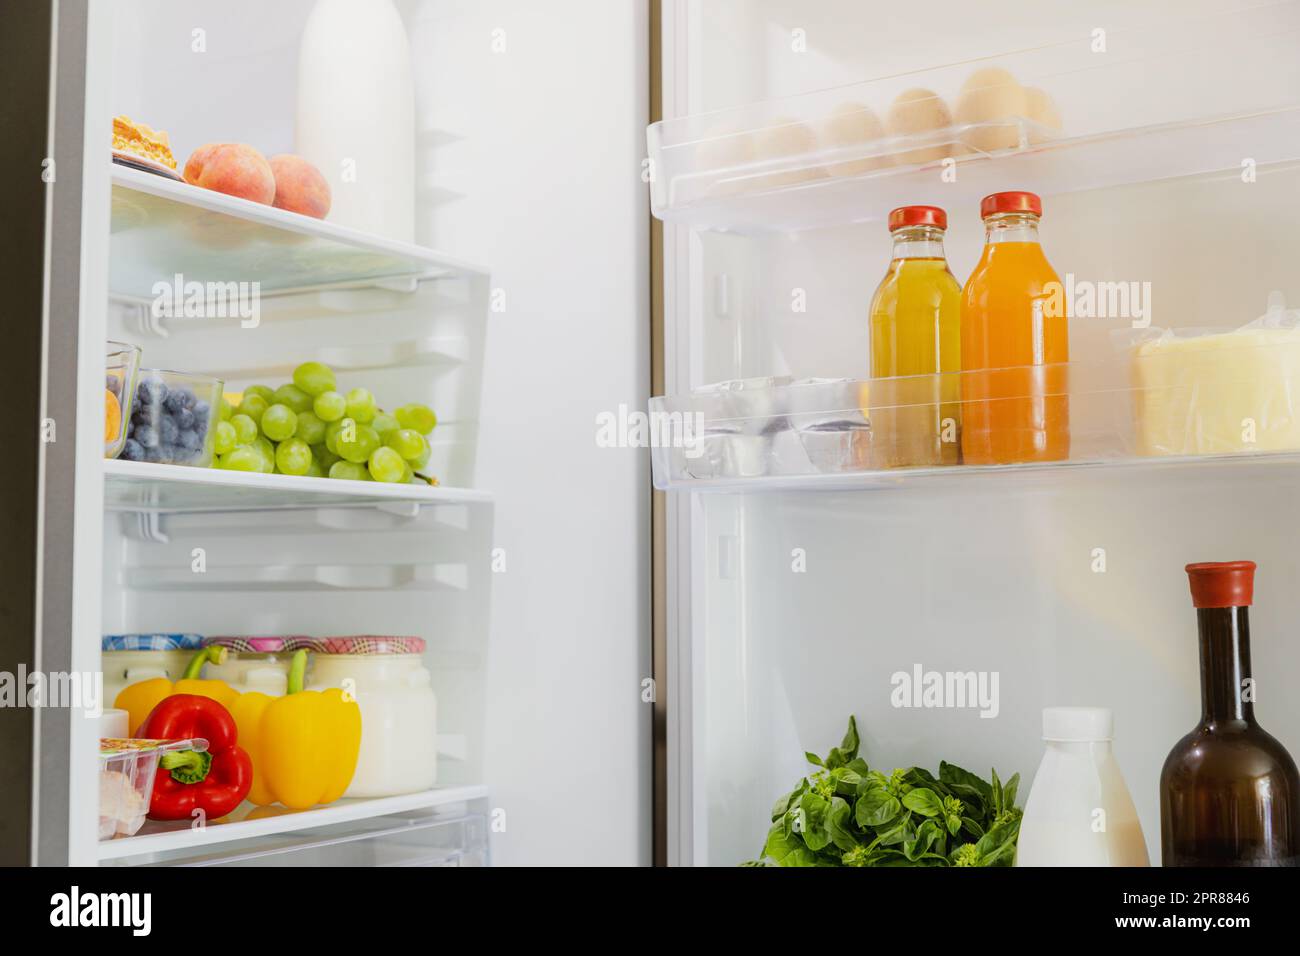 Open fridge or refrigerator door filled with fresh fruits and vegetables Stock Photo